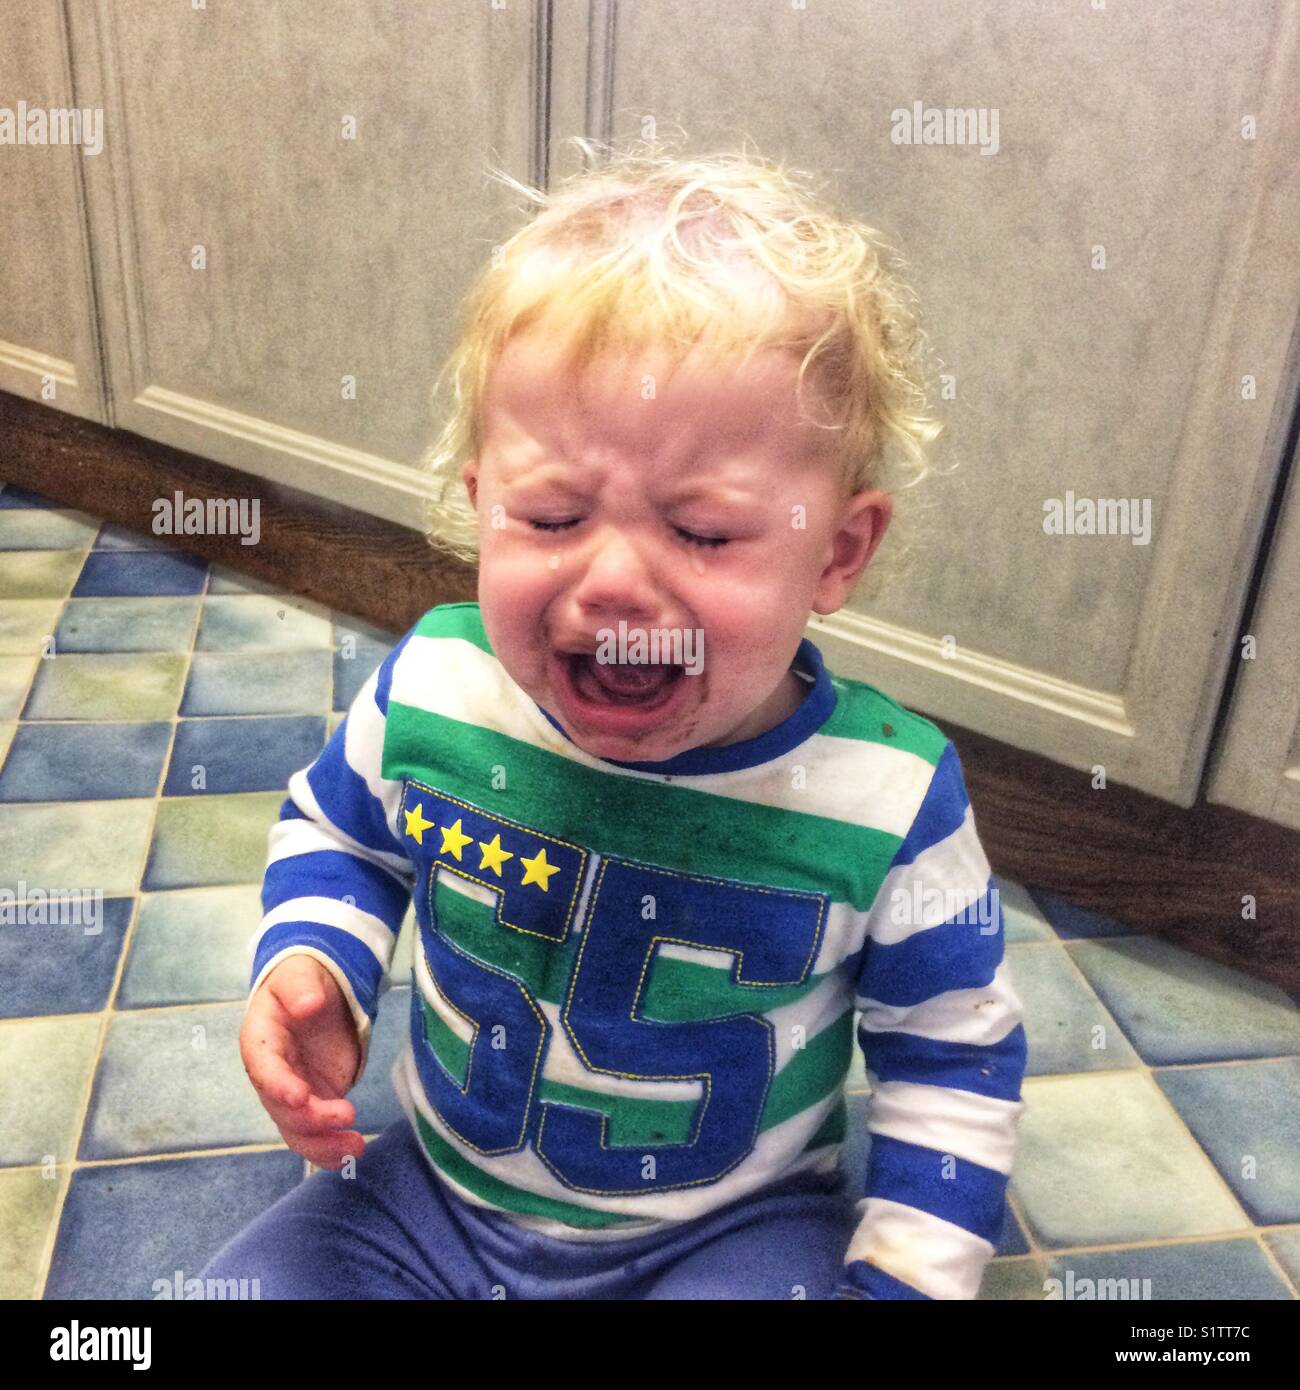 One year old boy with a chocolate covered mouth having a tantrum on the kitchen floor. Stock Photo